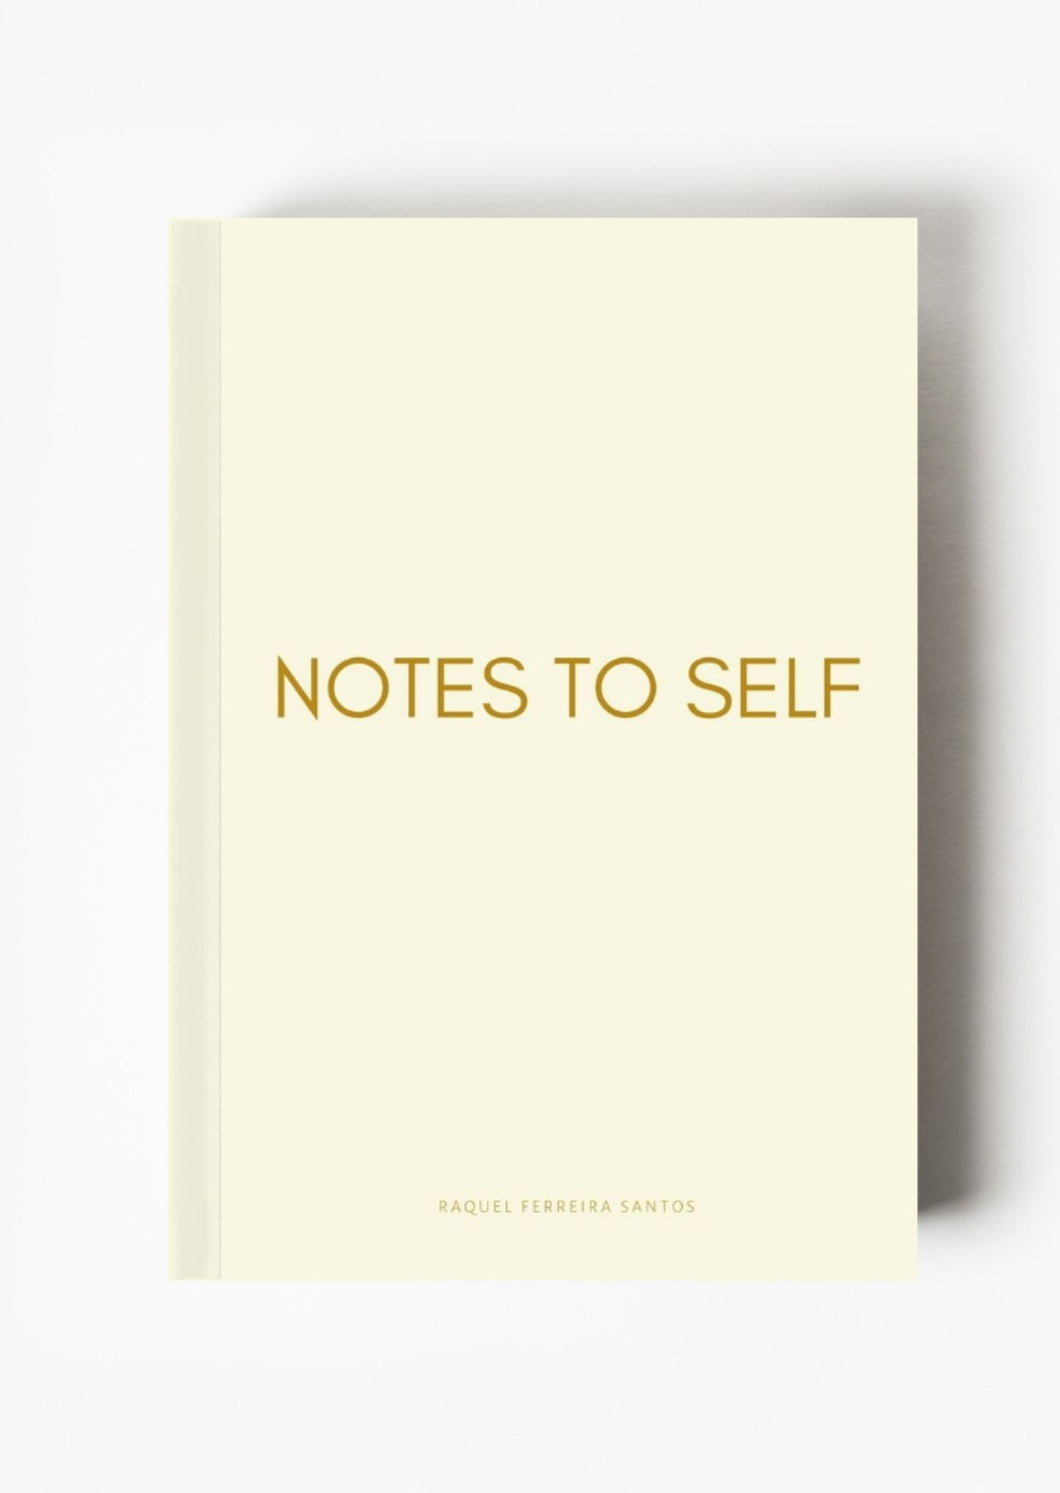 Notes to self - notebook